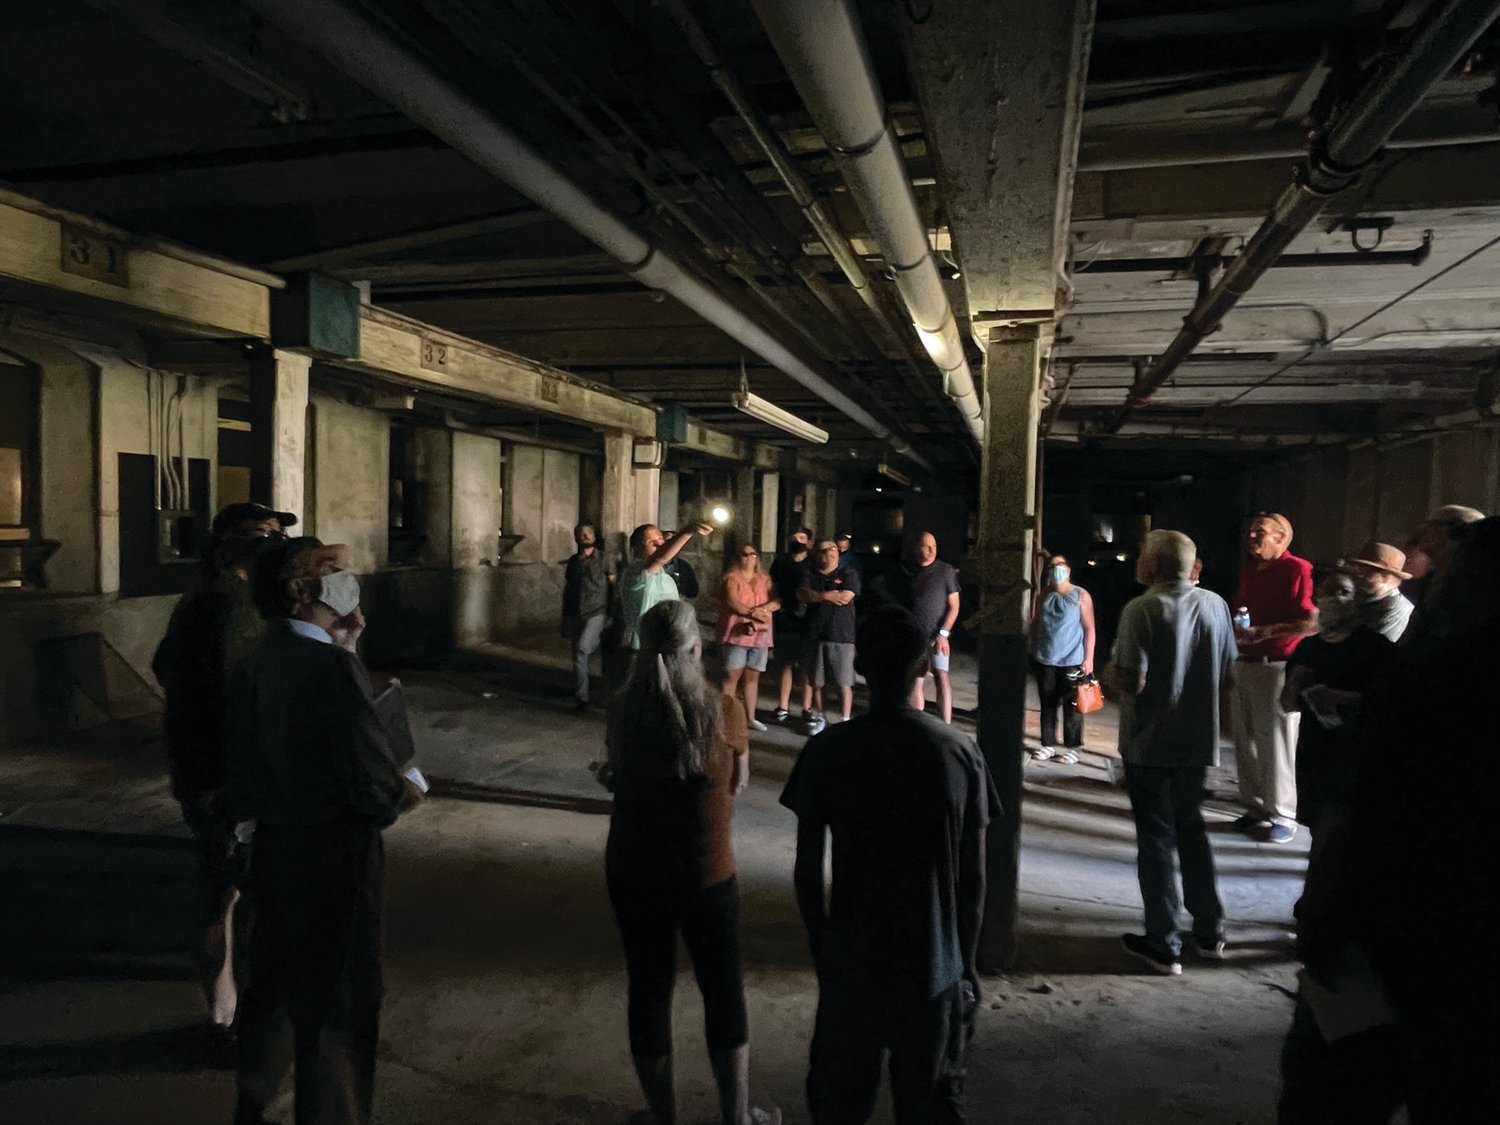 IN THE DARK: Chris Reynolds of Brady Sullivan Properties discusses his company’s approach to mill renovations during one of the inside stops on Saturday’s site walk. The company, which began in the early 1990s in New Hampshire, has expanded to include developments in Massachusetts, Vermont and Rhode Island.